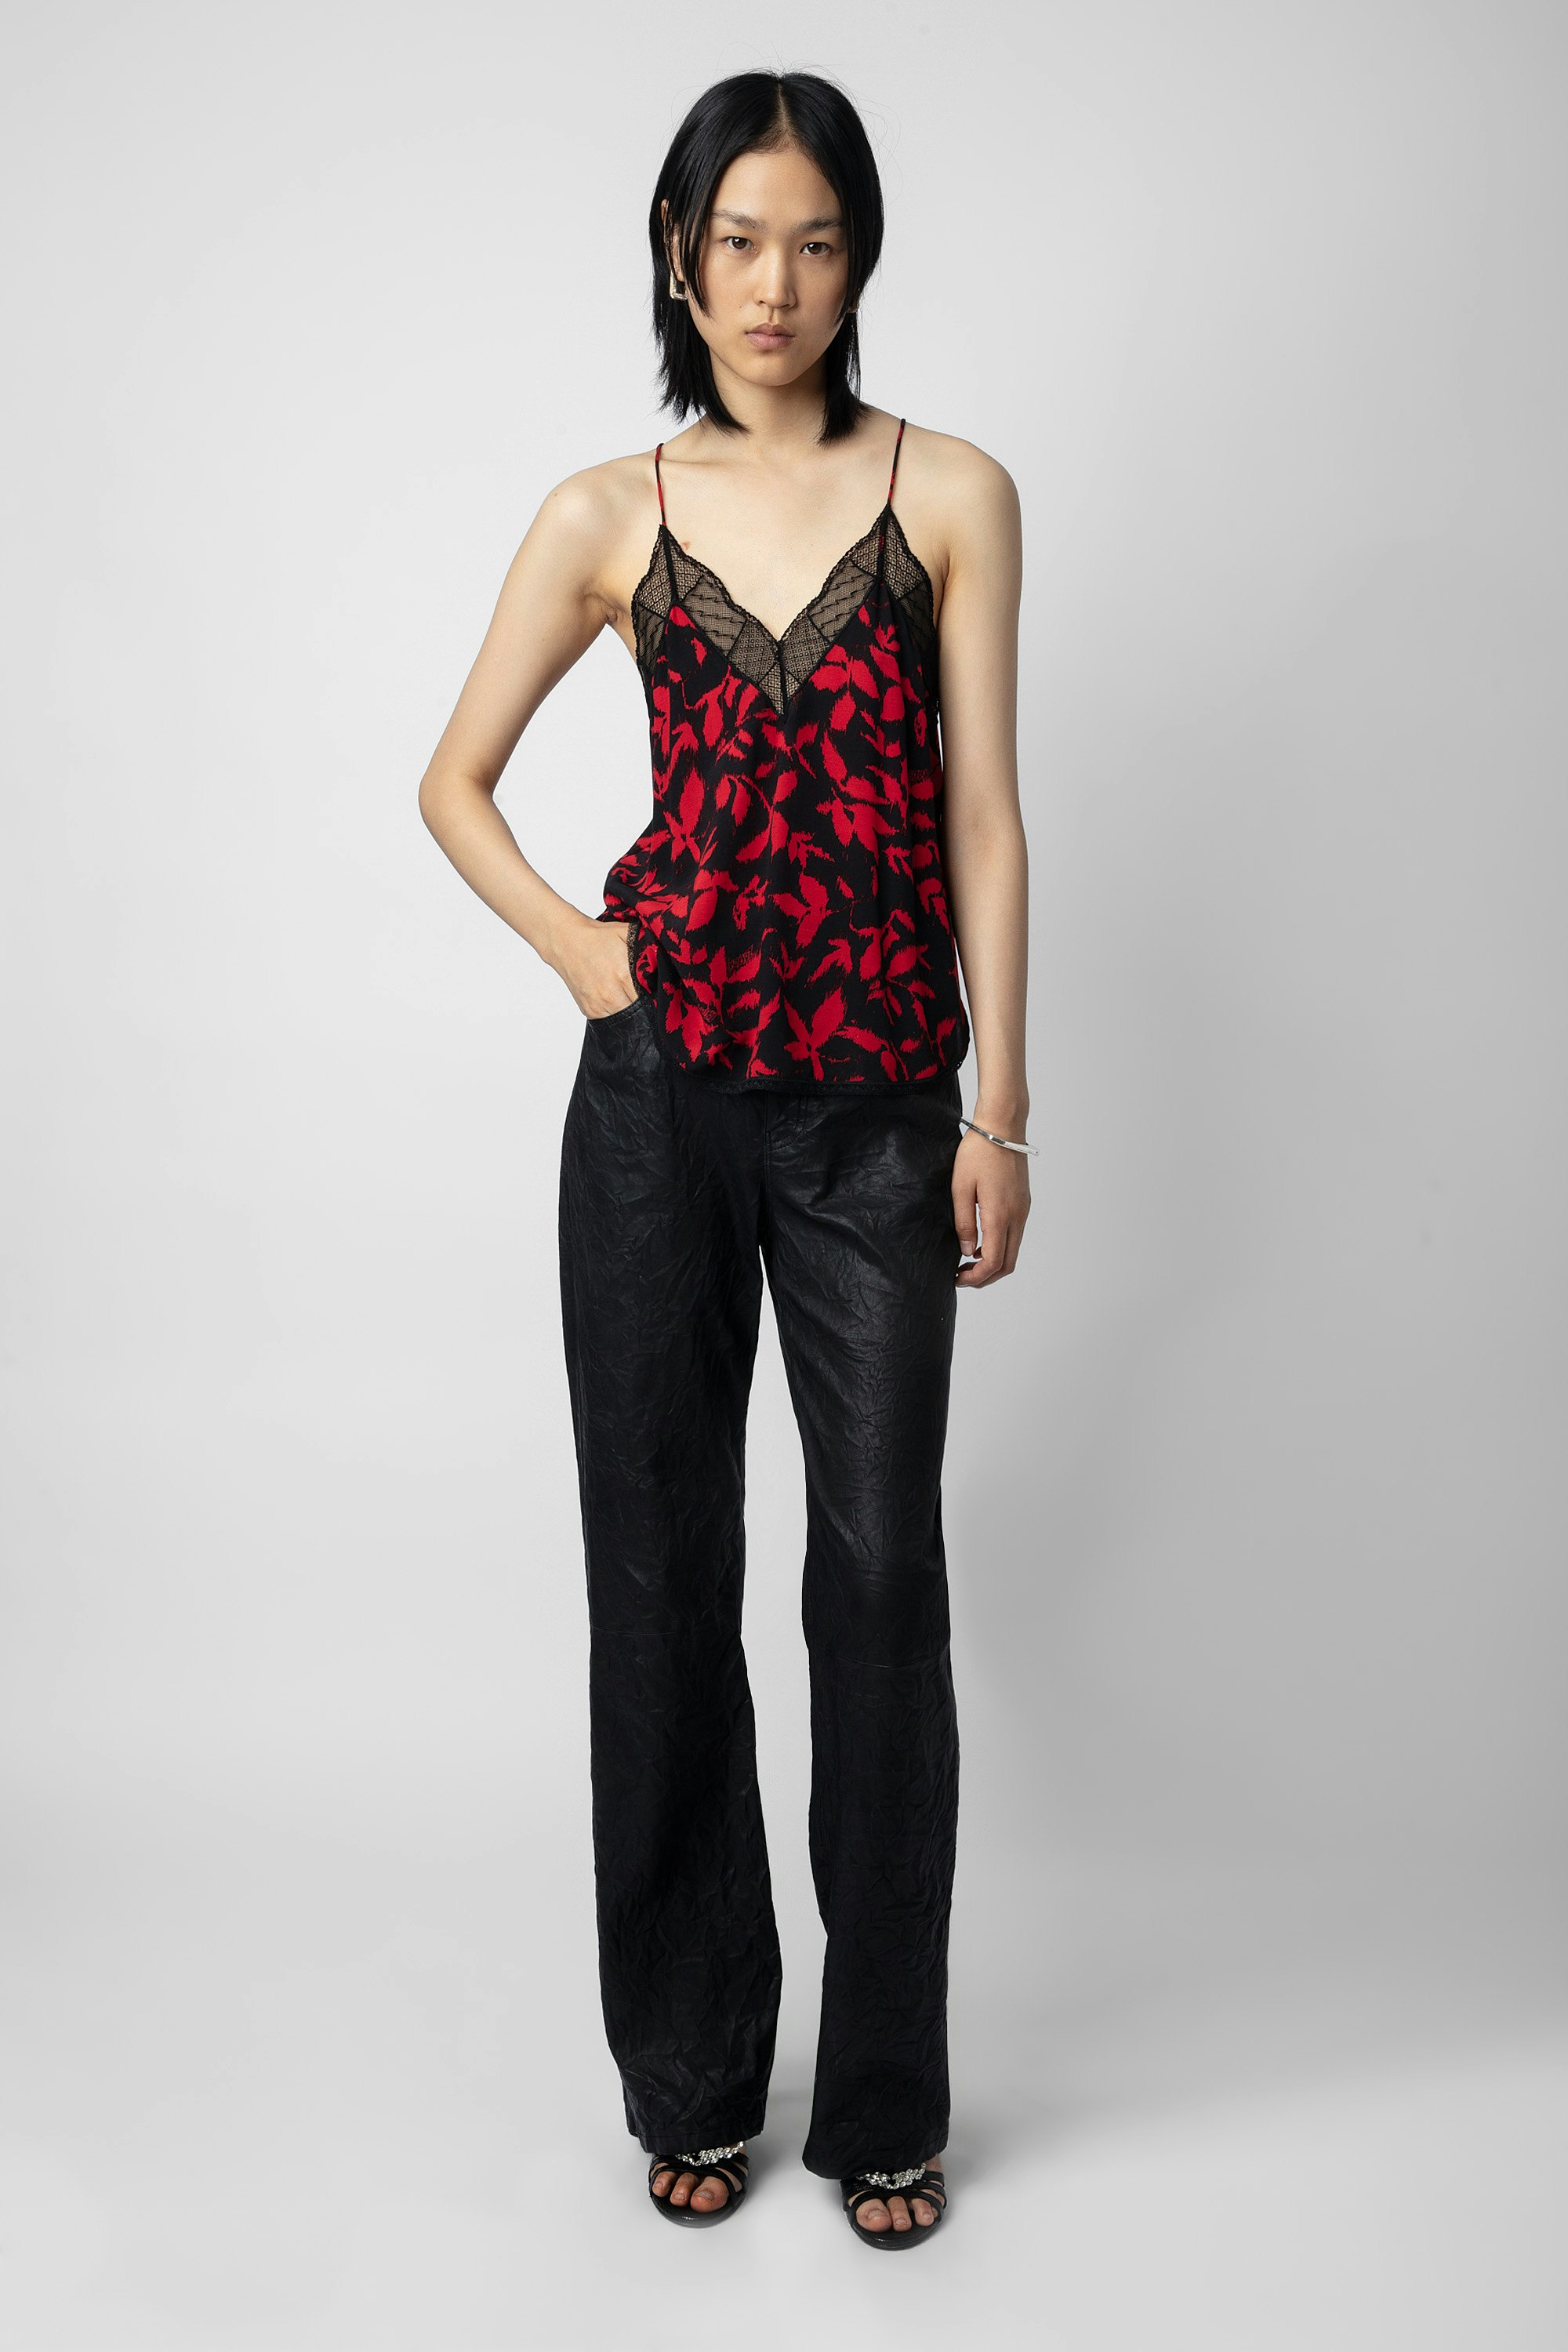 Christy Camisole - Women’s black camisole with print and lace trim.